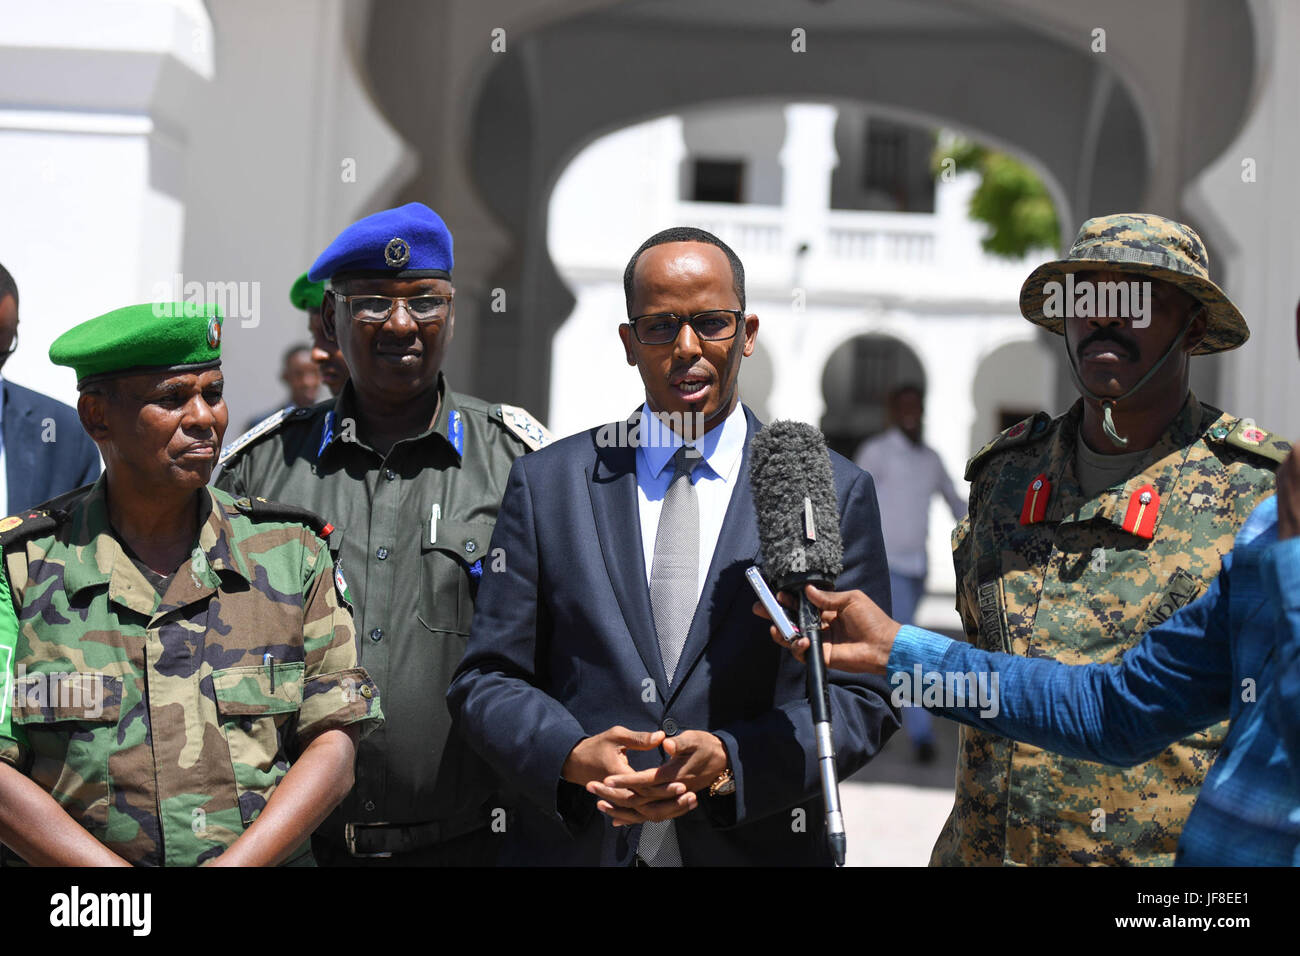 Thabit Abdi Mohamed, the Mayor of Mogadishu who is also the Governor of the Benadir Regional Administration addresses the media at the end of a meeting with officers from the African Union Mission in Somalia (AMISOM) at the Mogadishu City Headquarters, Somalia on May 13, 2017. AMISOM Photo / Omar Abdisalan Stock Photo